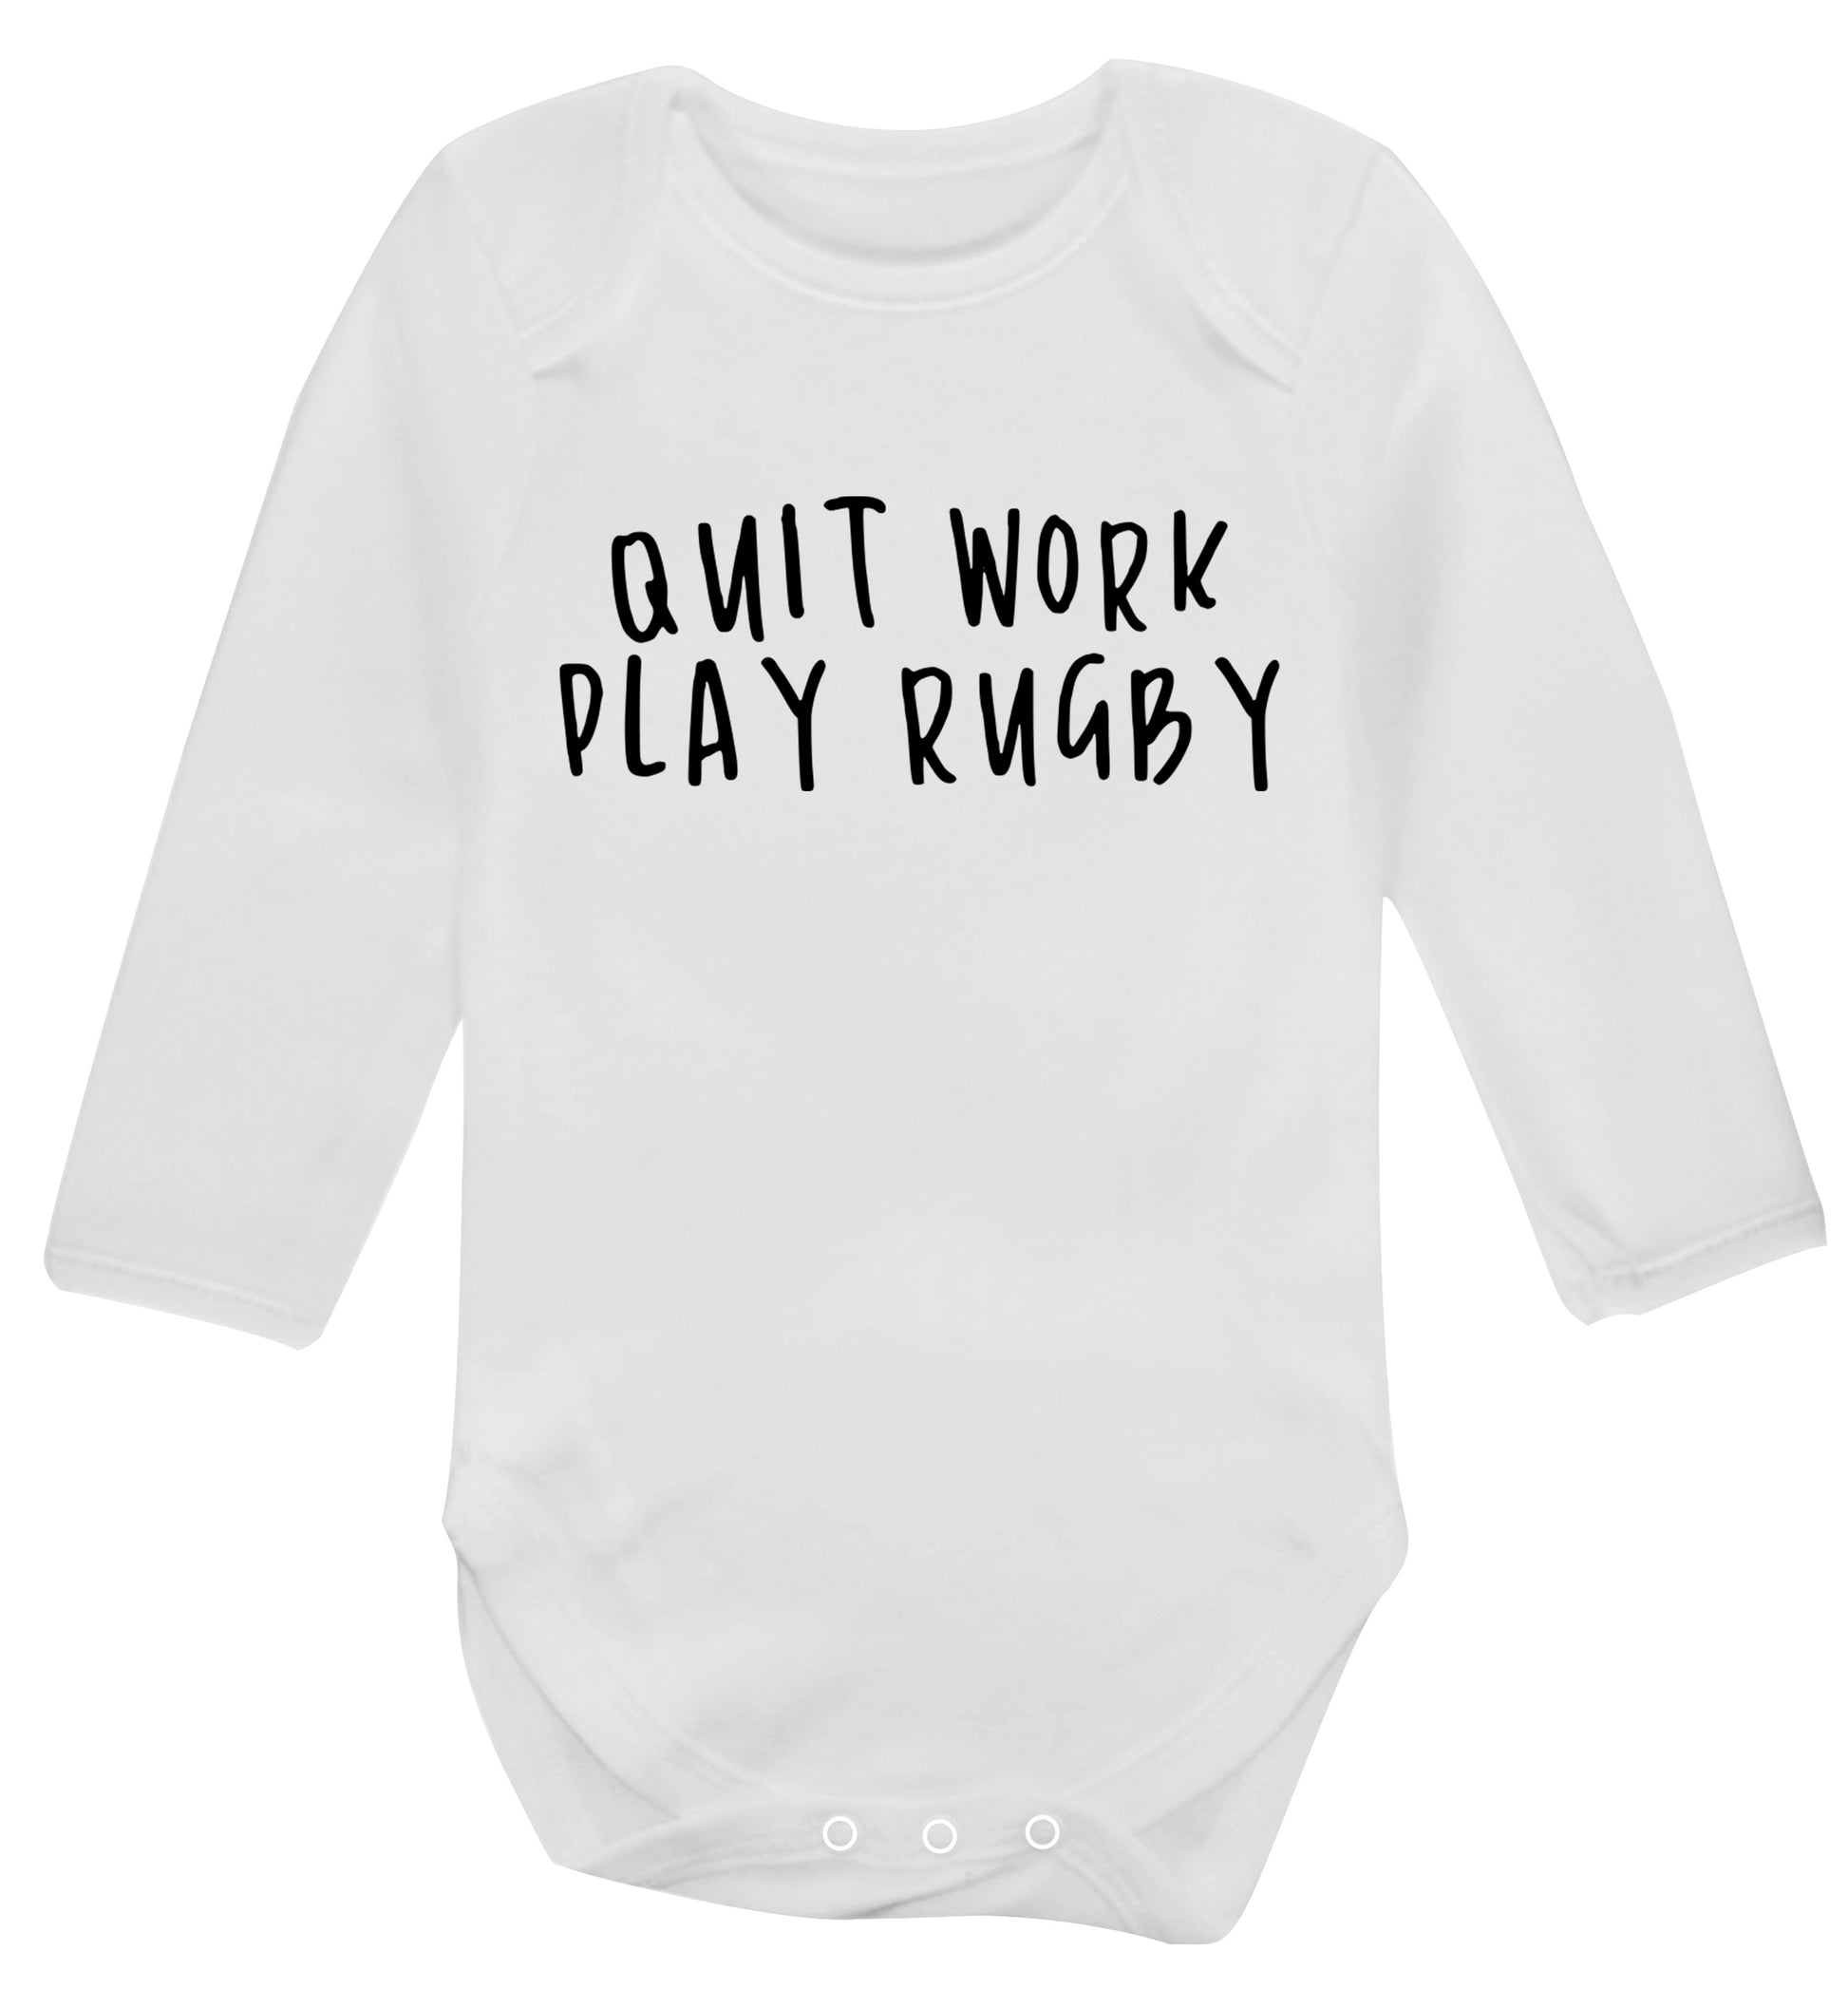 Quit work play rugby Baby Vest long sleeved white 6-12 months